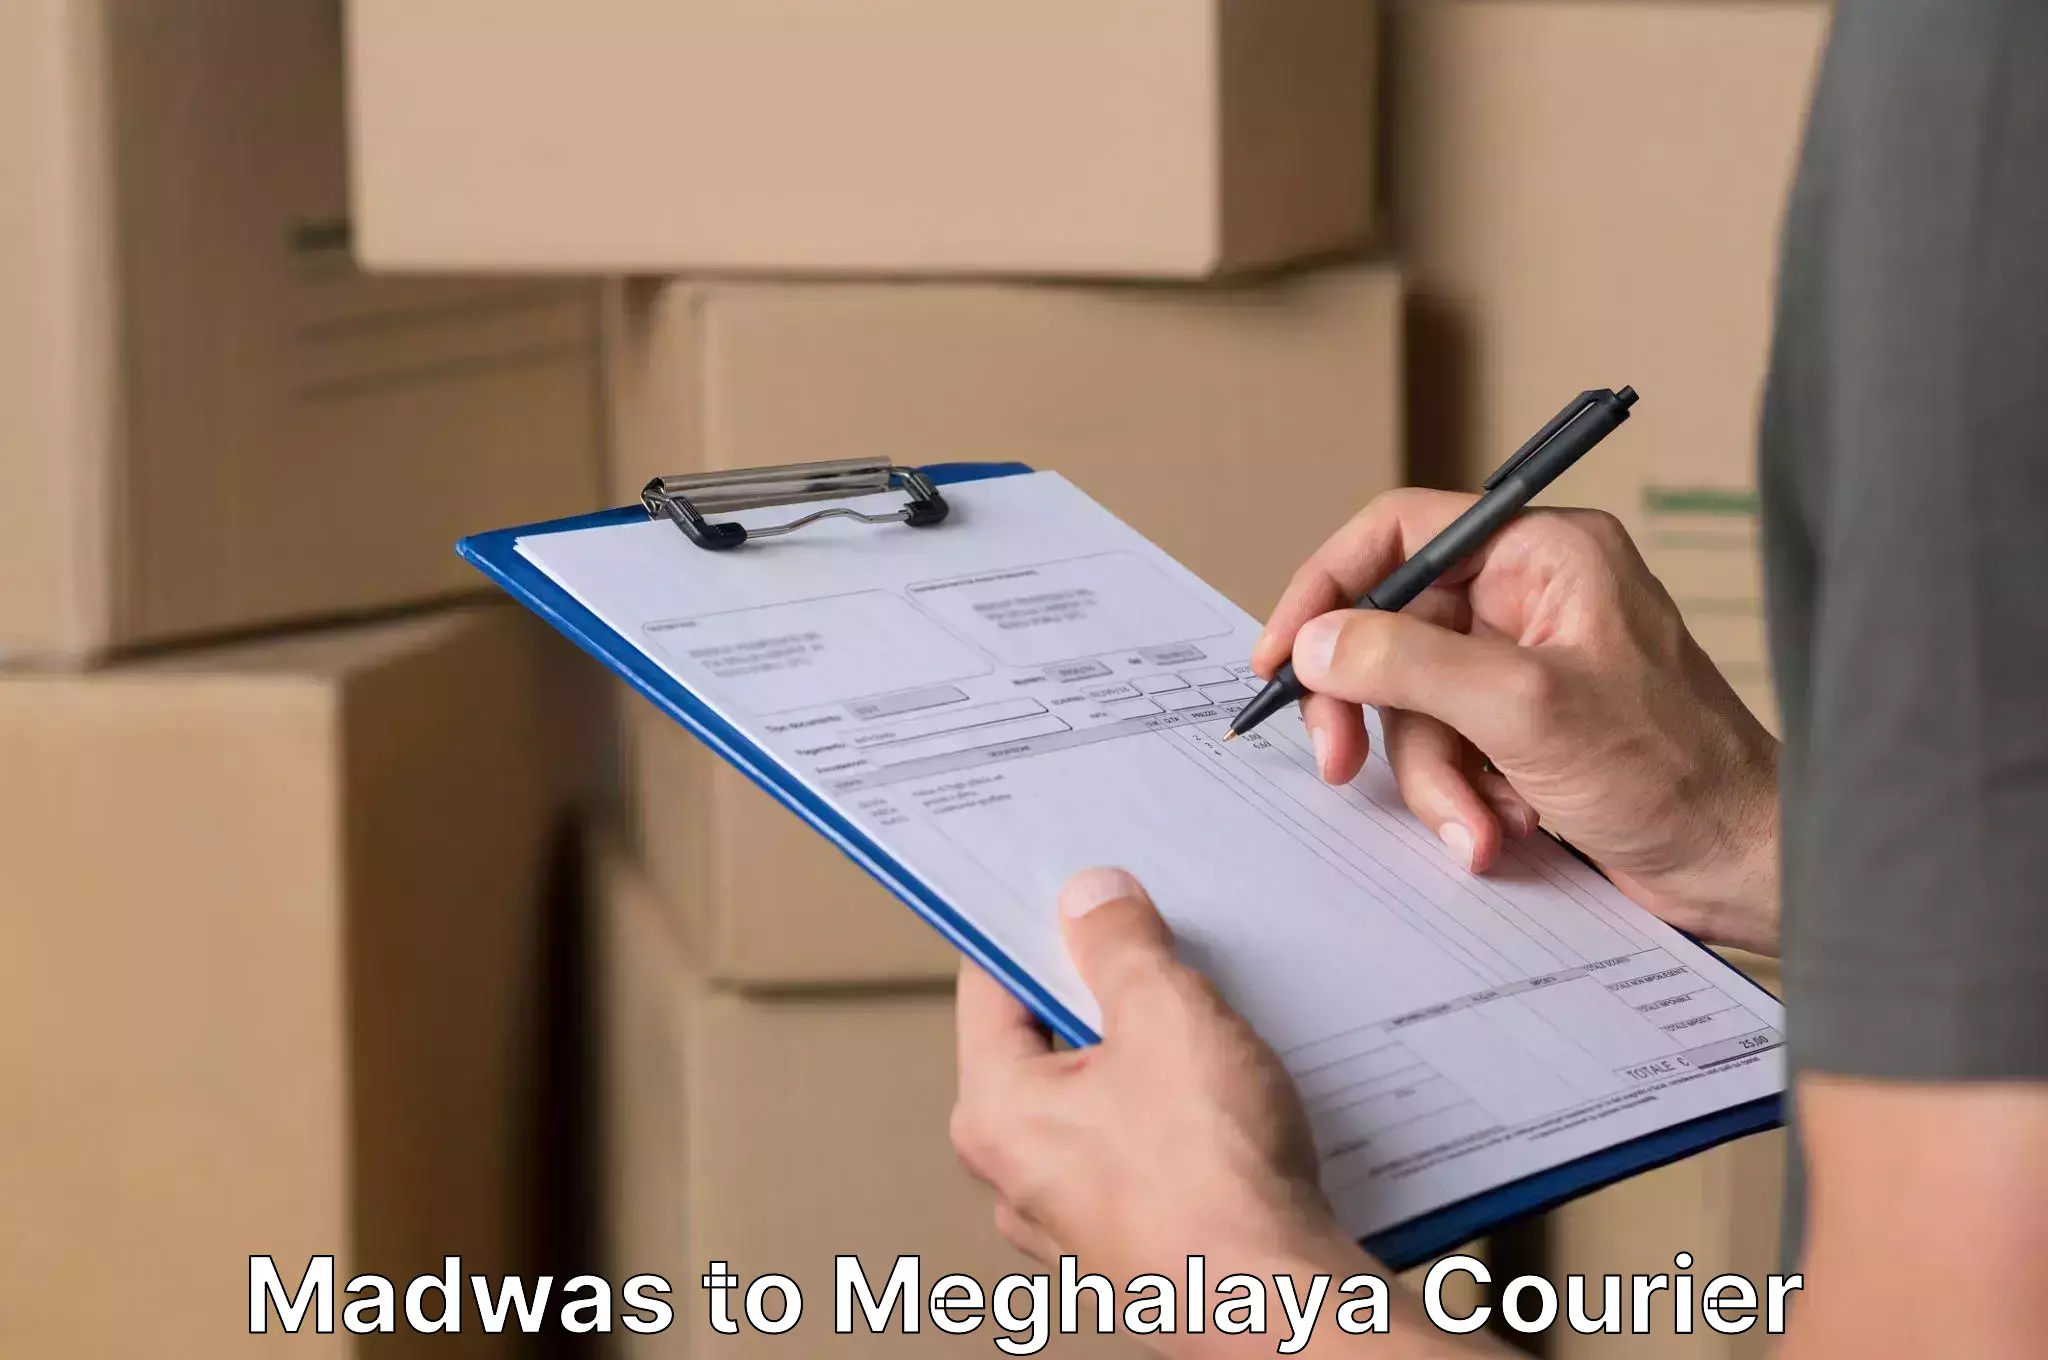 Furniture delivery service Madwas to Dkhiah West